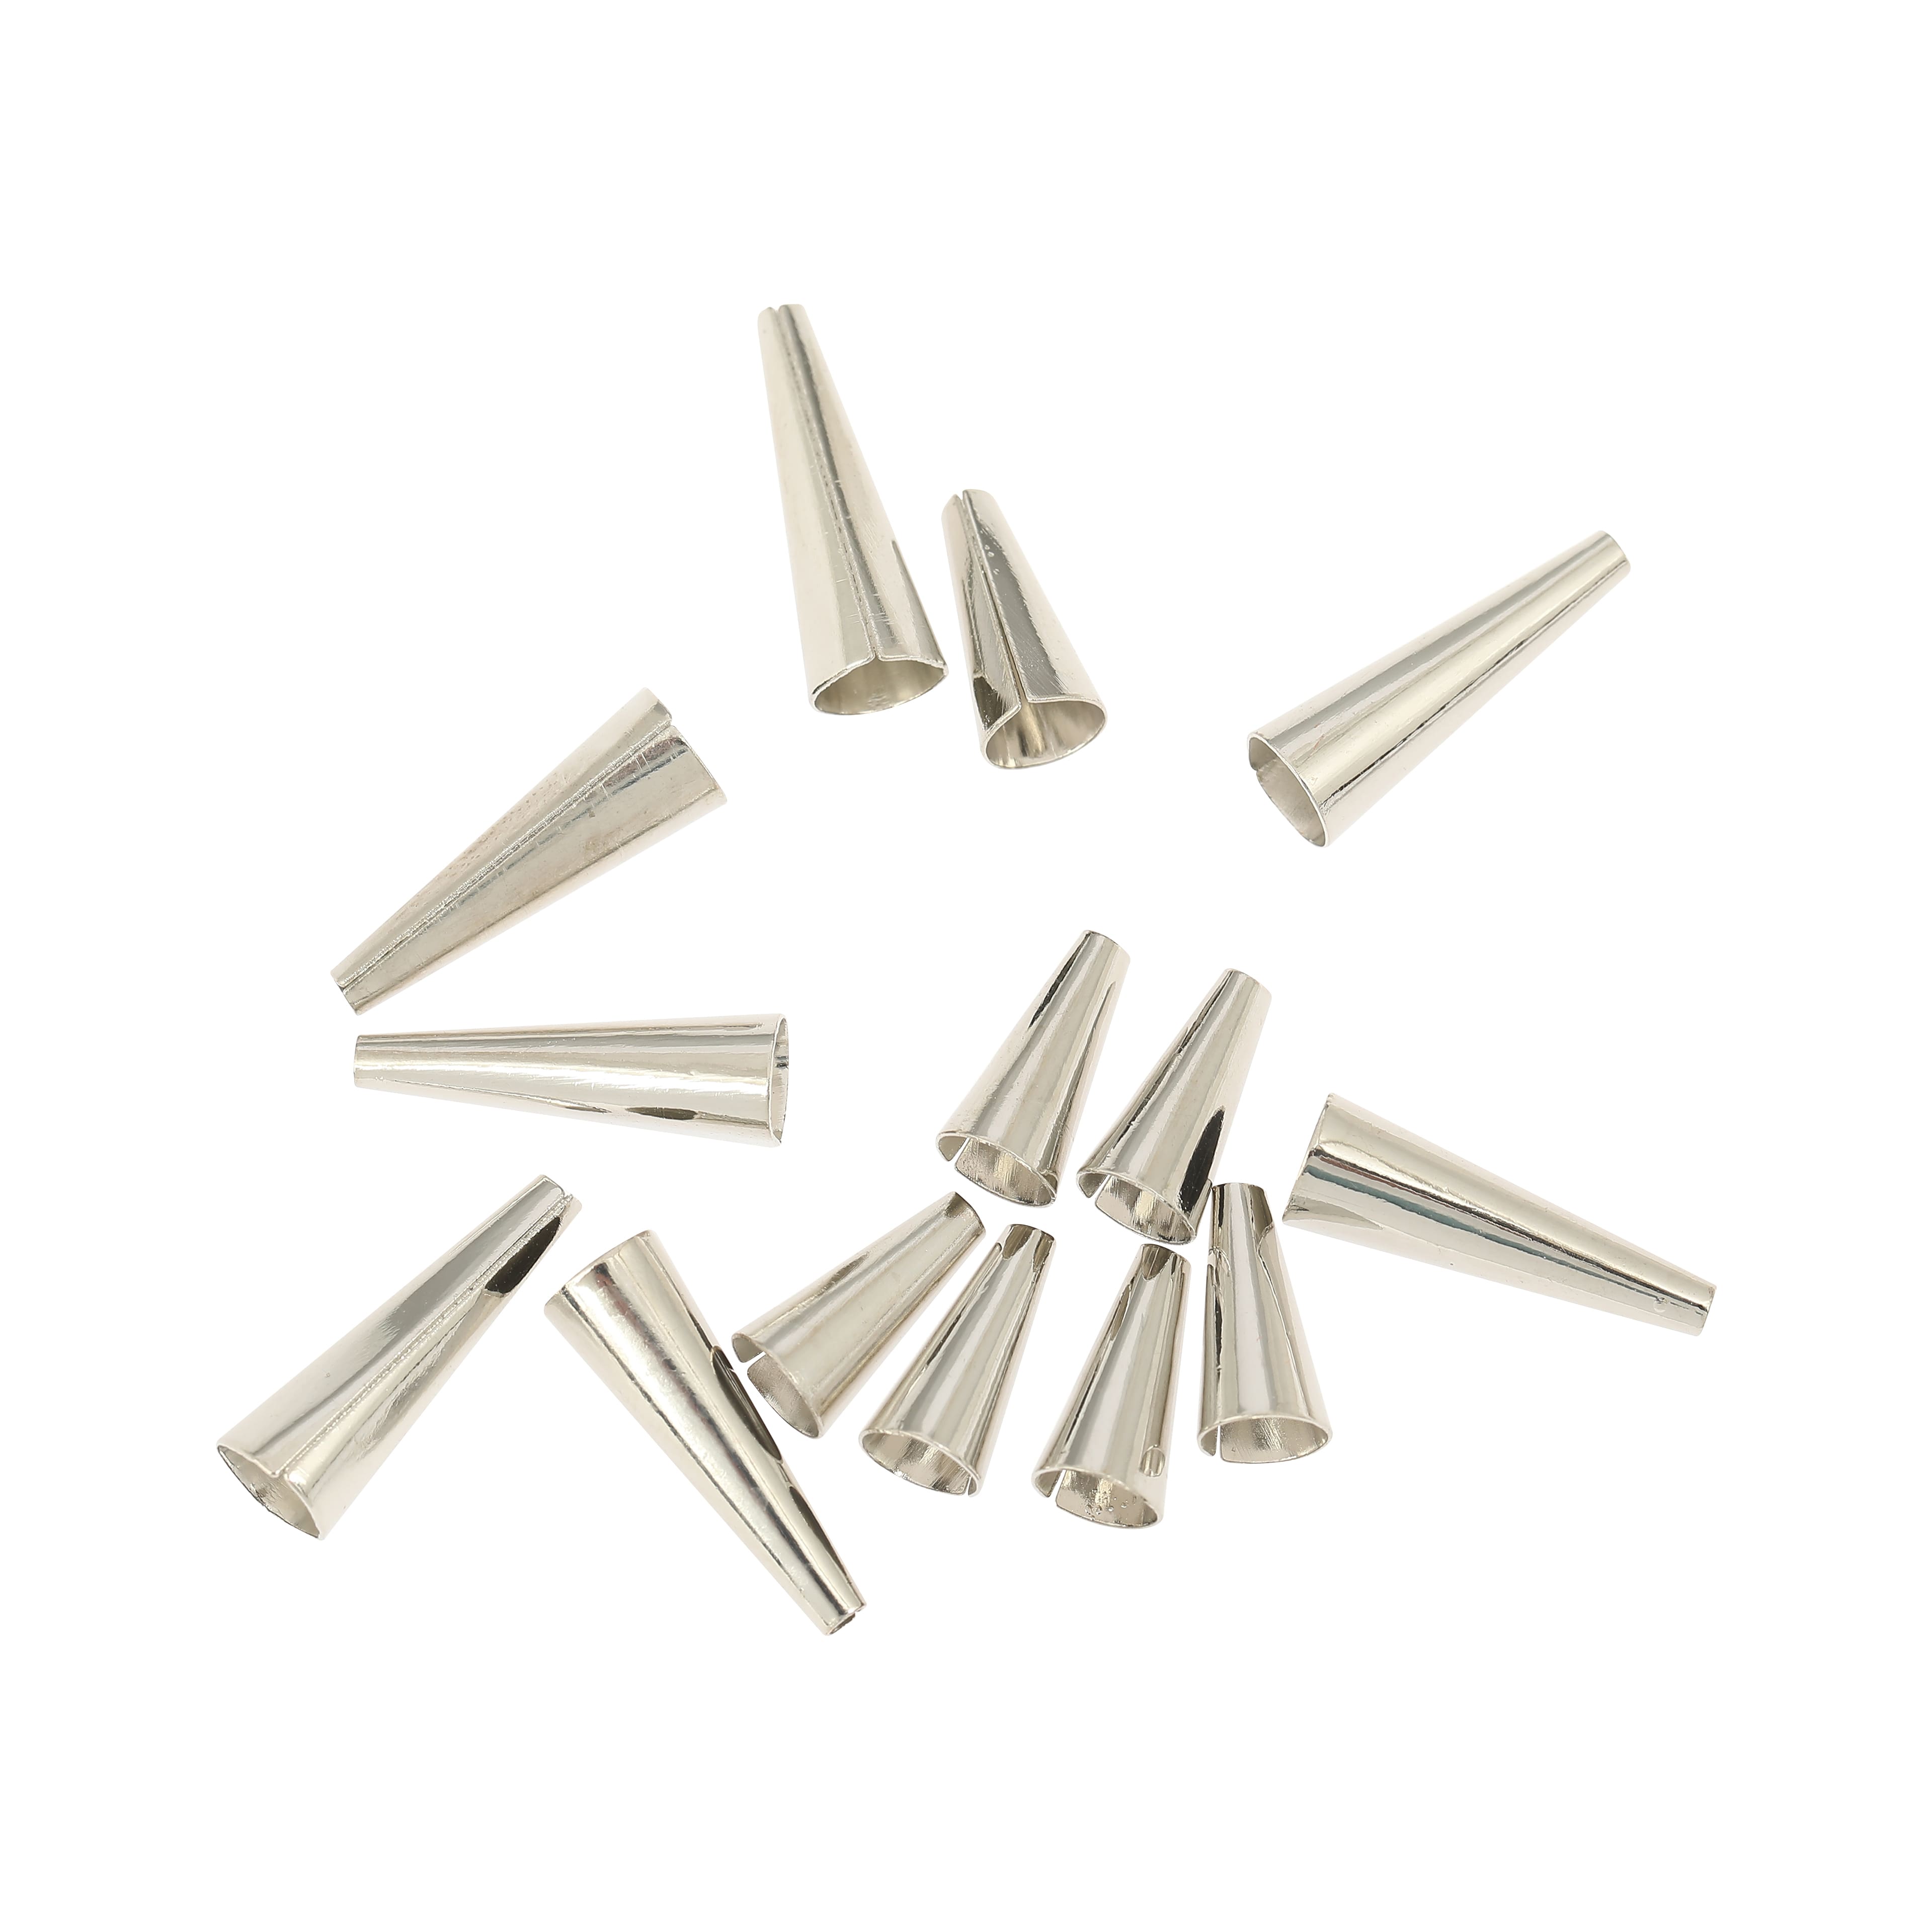 12 Packs: 23 Ct. (276 Total) Smooth Silver Bead Cones by Bead Landing